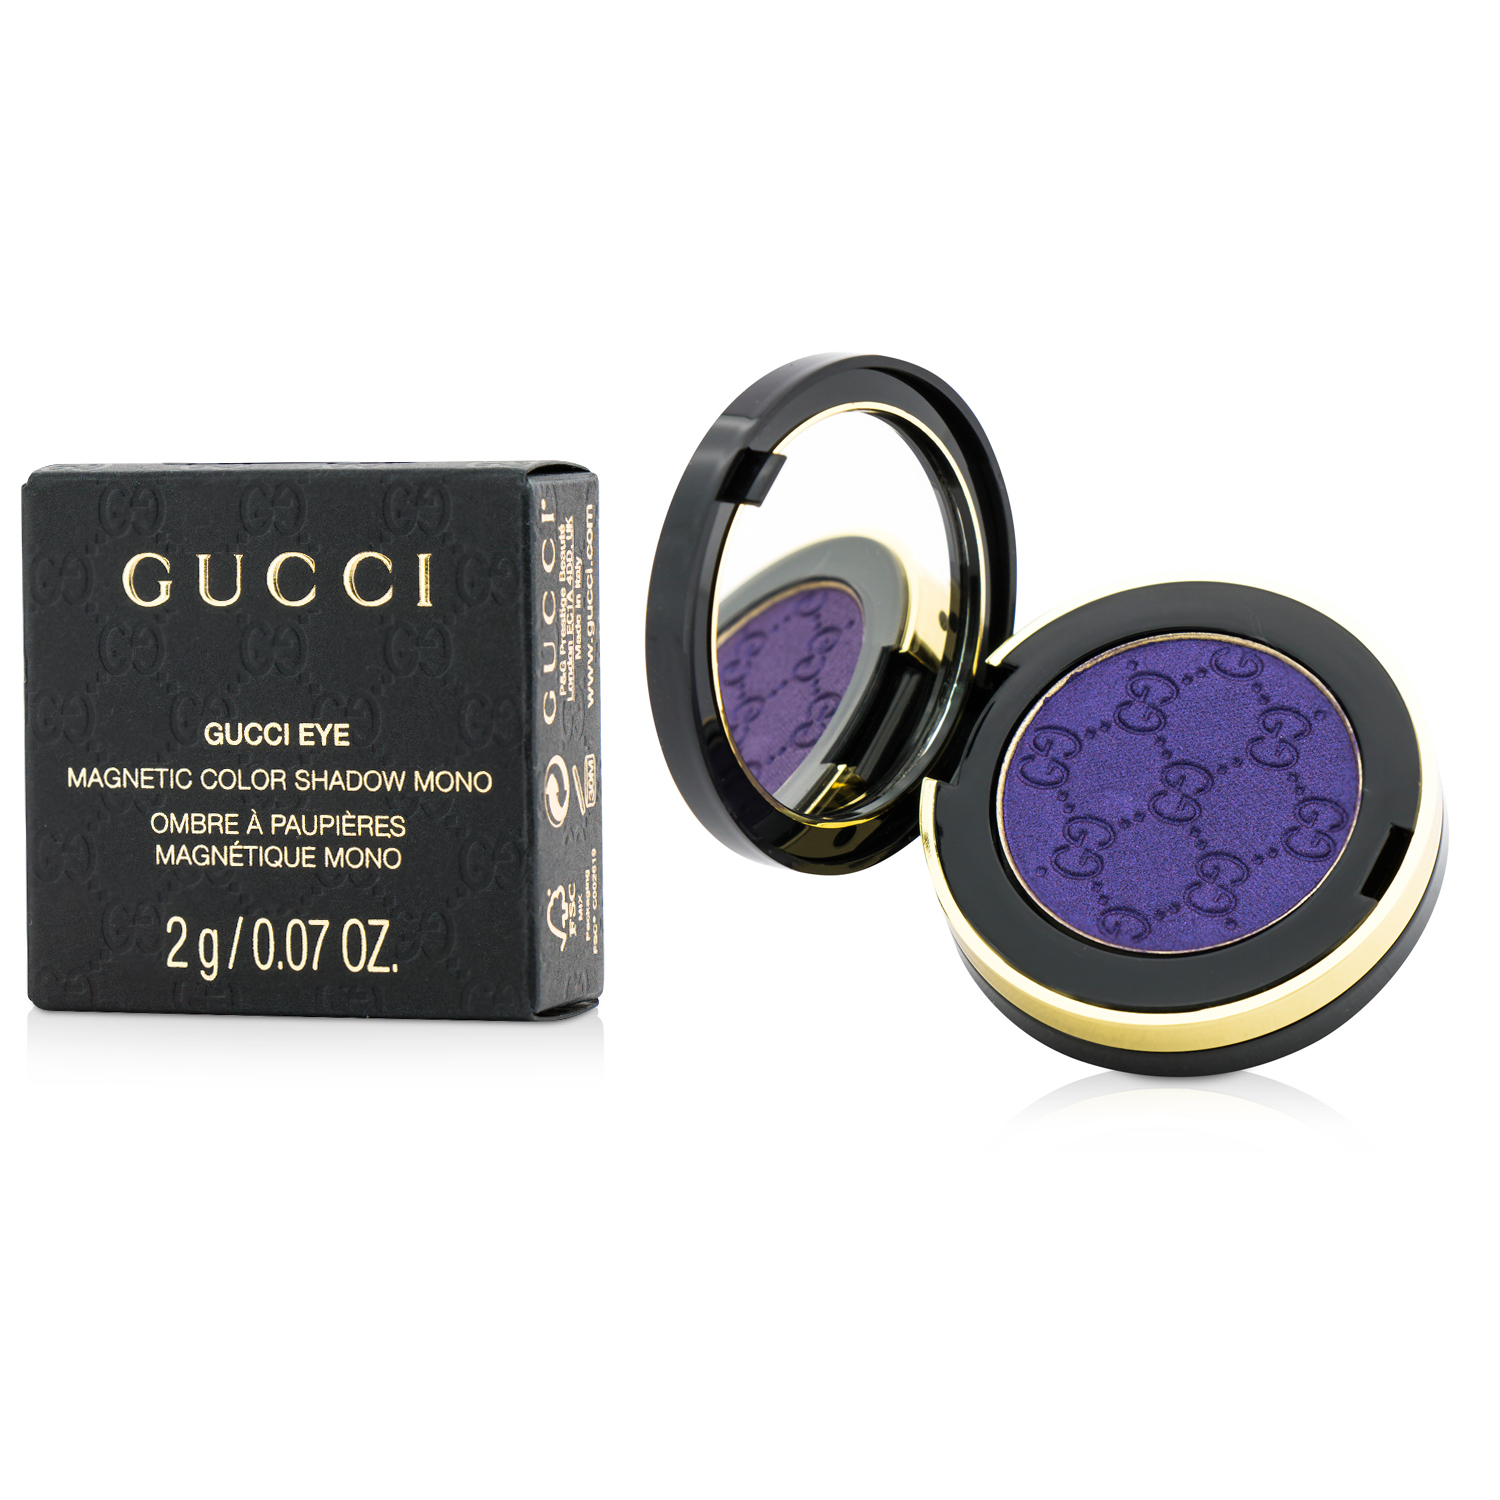 Magnetic Color Shadow Mono - #150 Ultra Violet Gucci Image